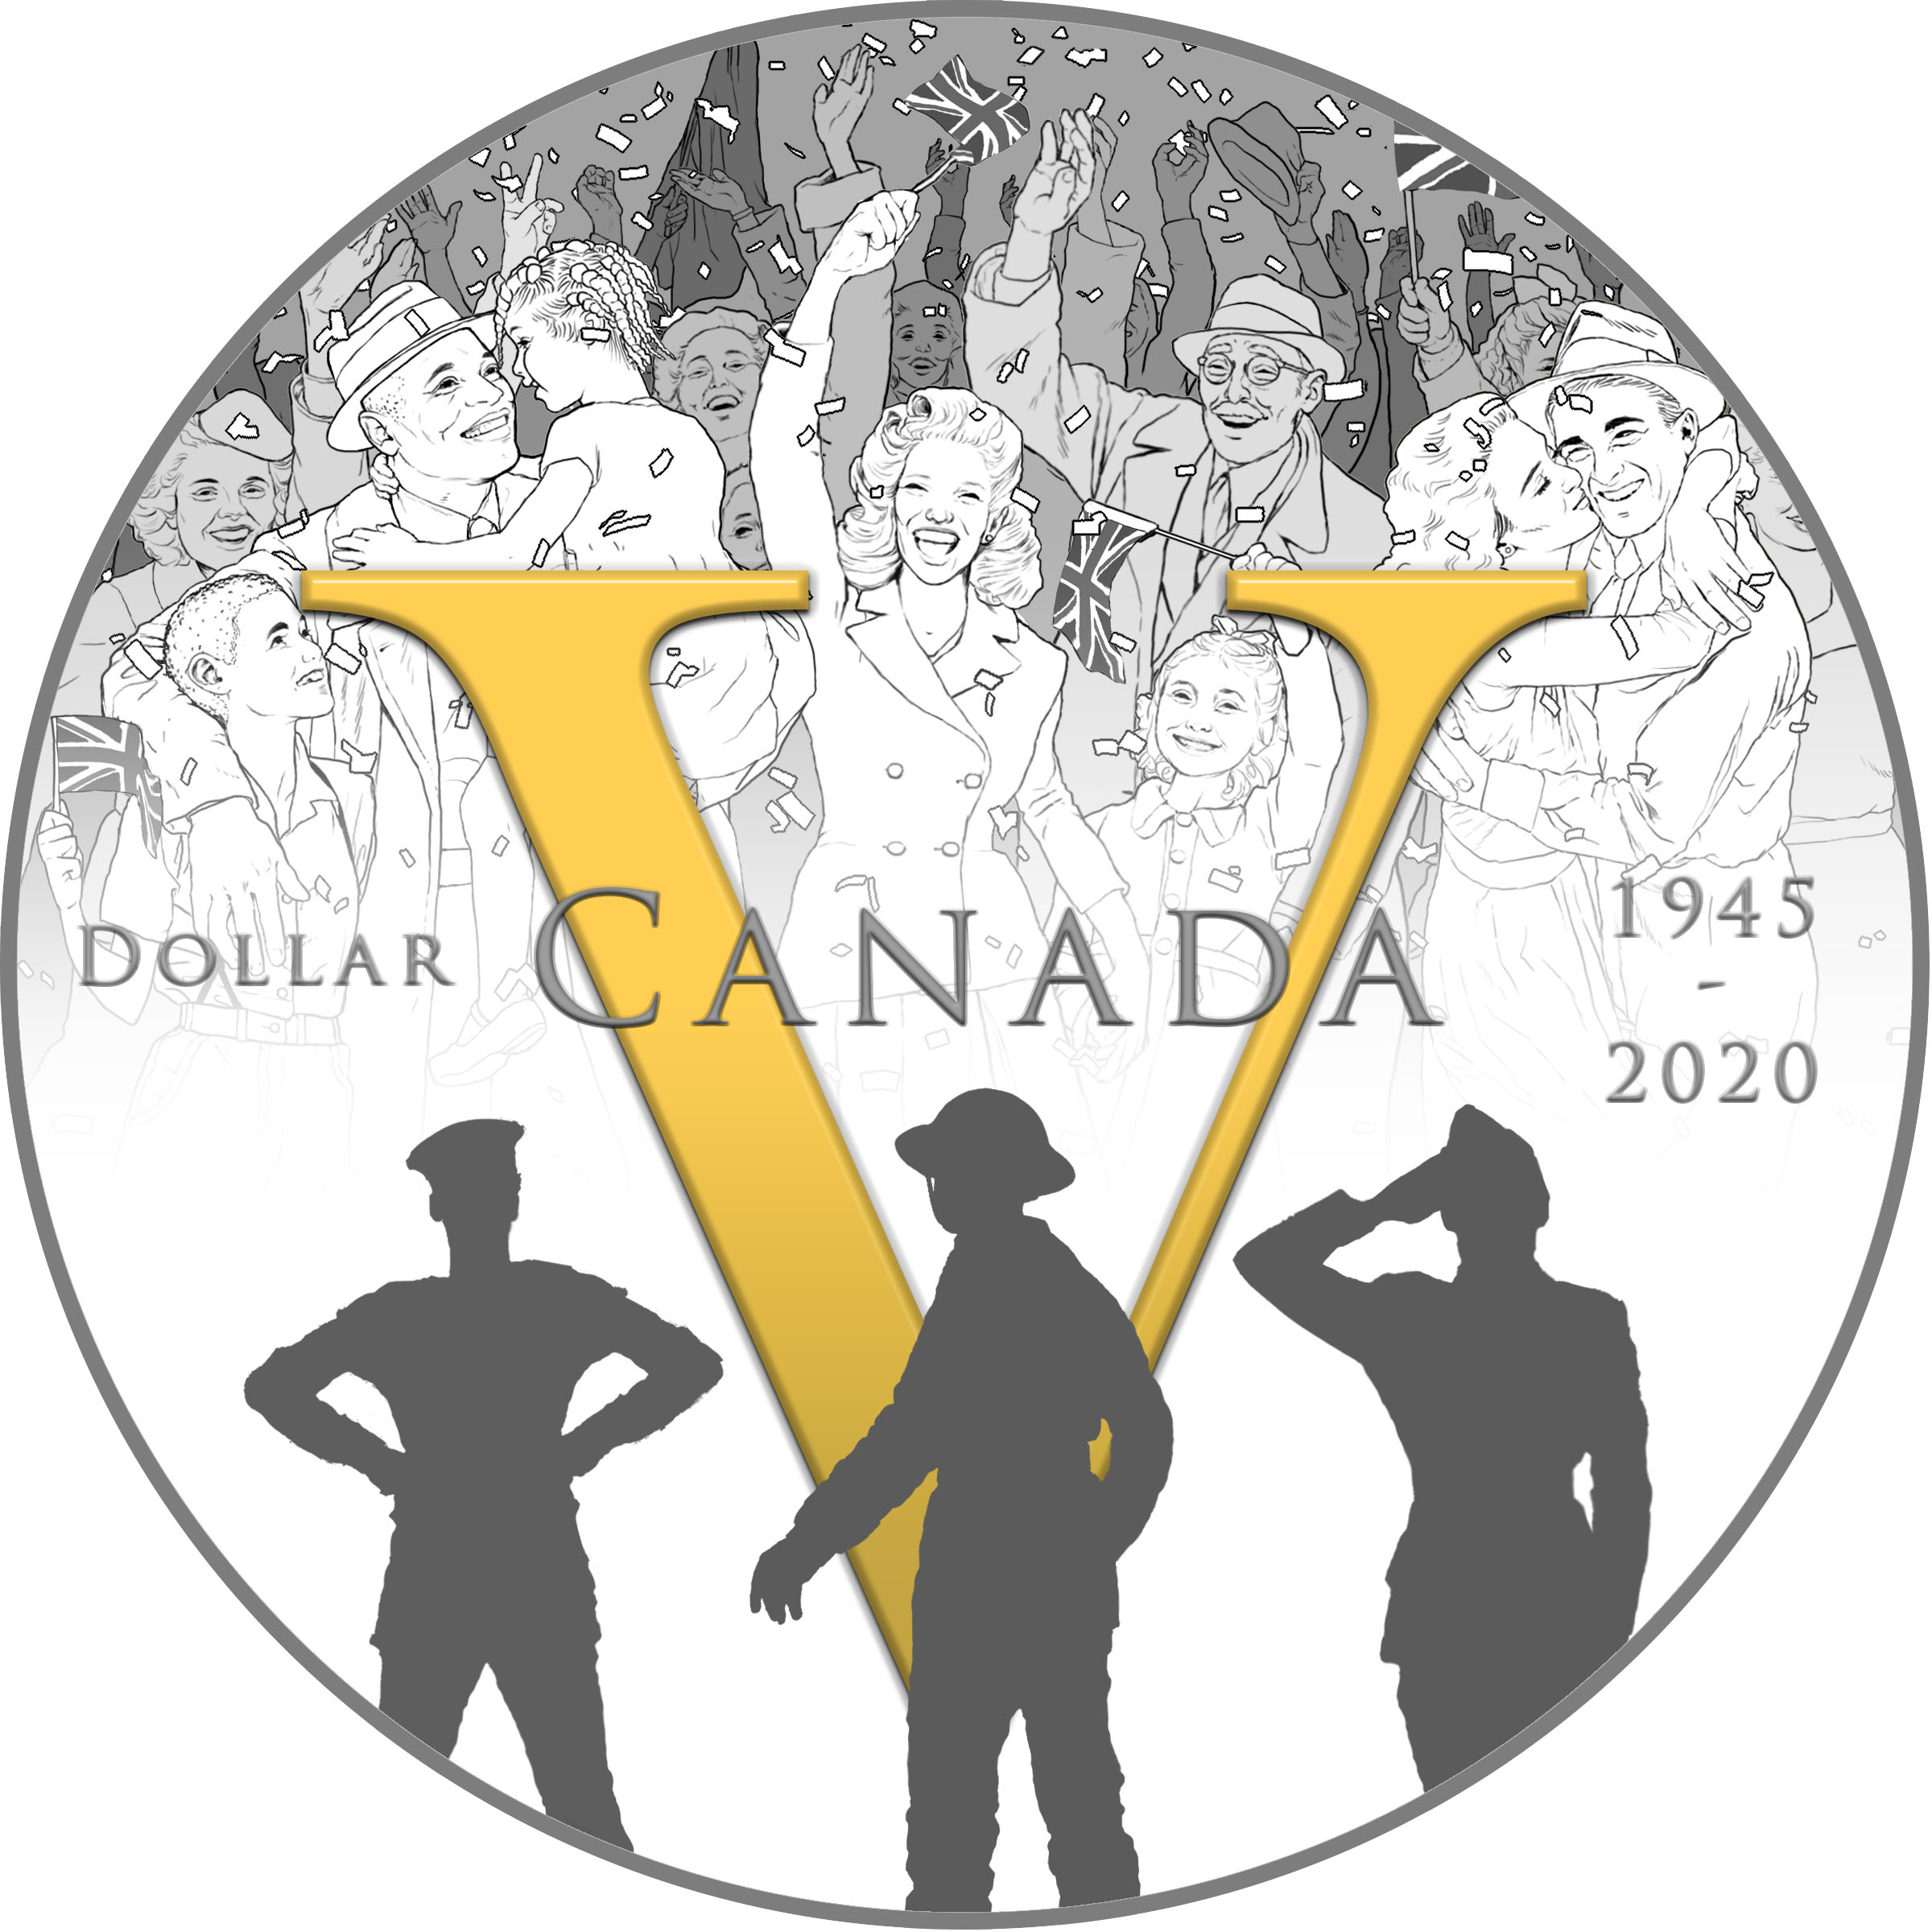 Young’s 2020 Fine Silver Proof Dollar design foregrounds three silhouettes representing the branches of the Canadian military—Navy, Army and Air Force—recognizing their vital role in making victory possible. Behind them is a crowd, those who kept the country going and poured themselves into the war effort on the home front, who loved and lost and were jubilant that the war was over.